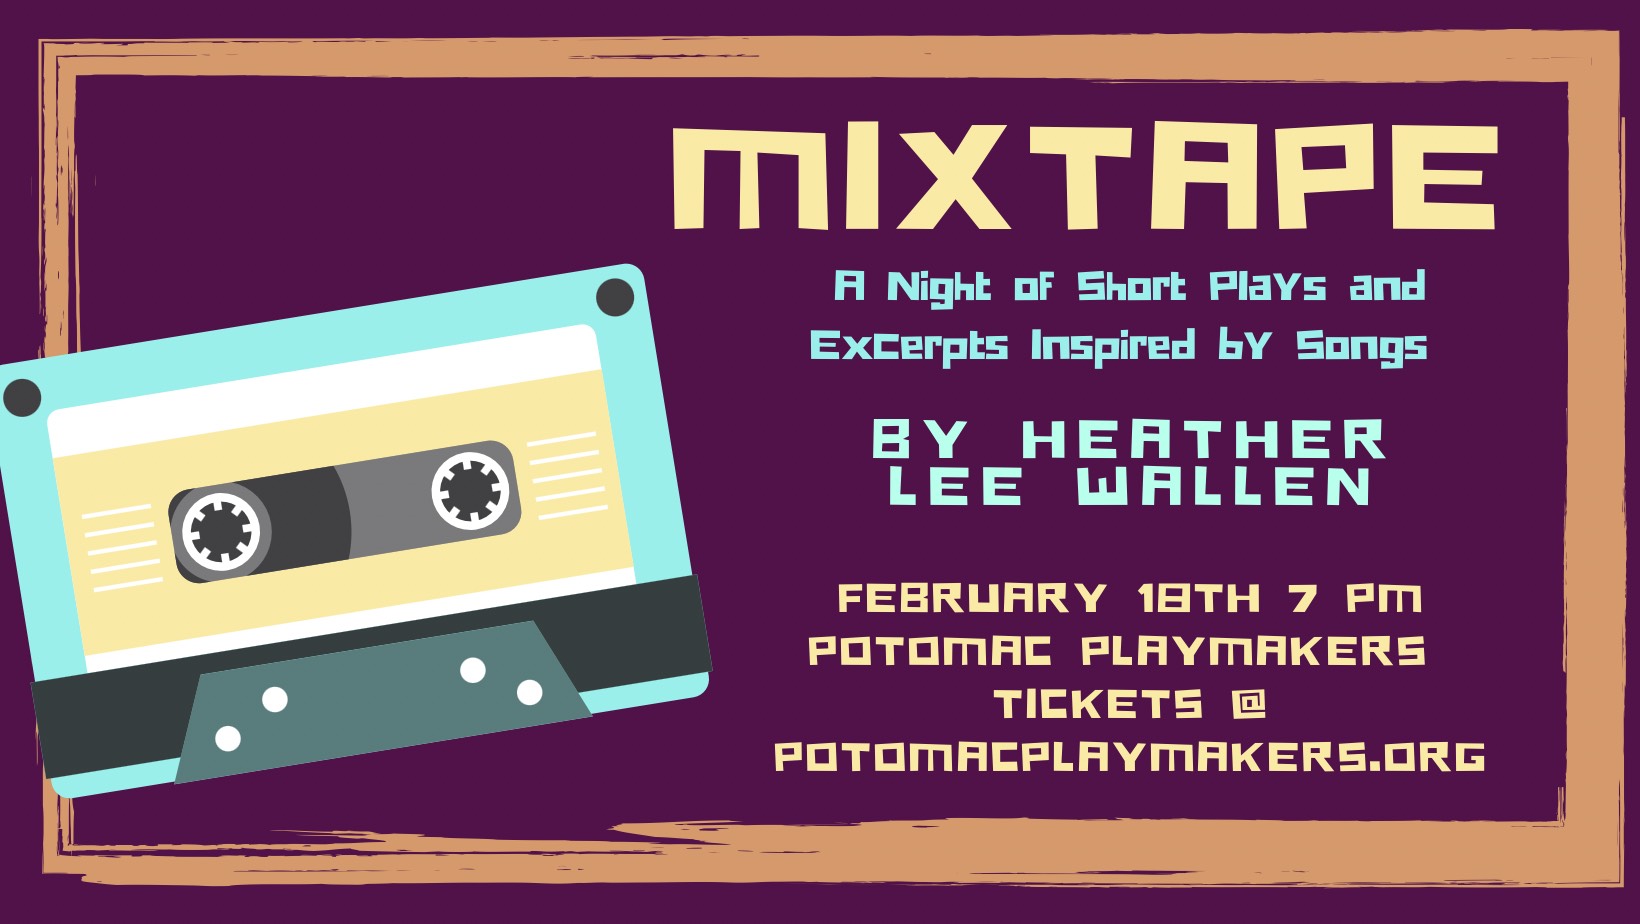 ‘Mixtape’, a showcase of plays by Heather Lee Wallen  @7PM on 2/18/23